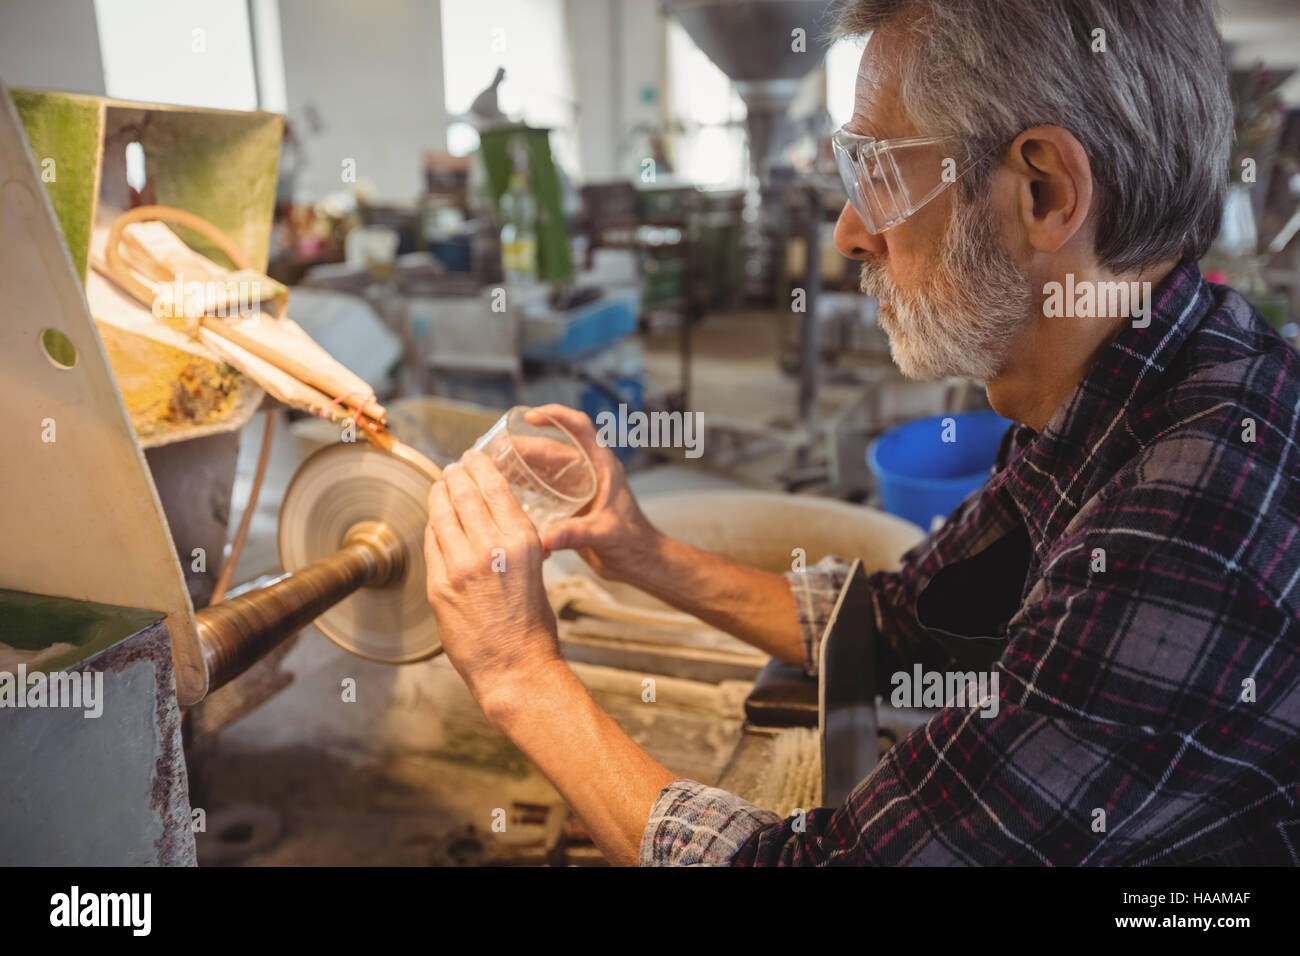 Glassblower polishing and grinding a glassware Stock Photo